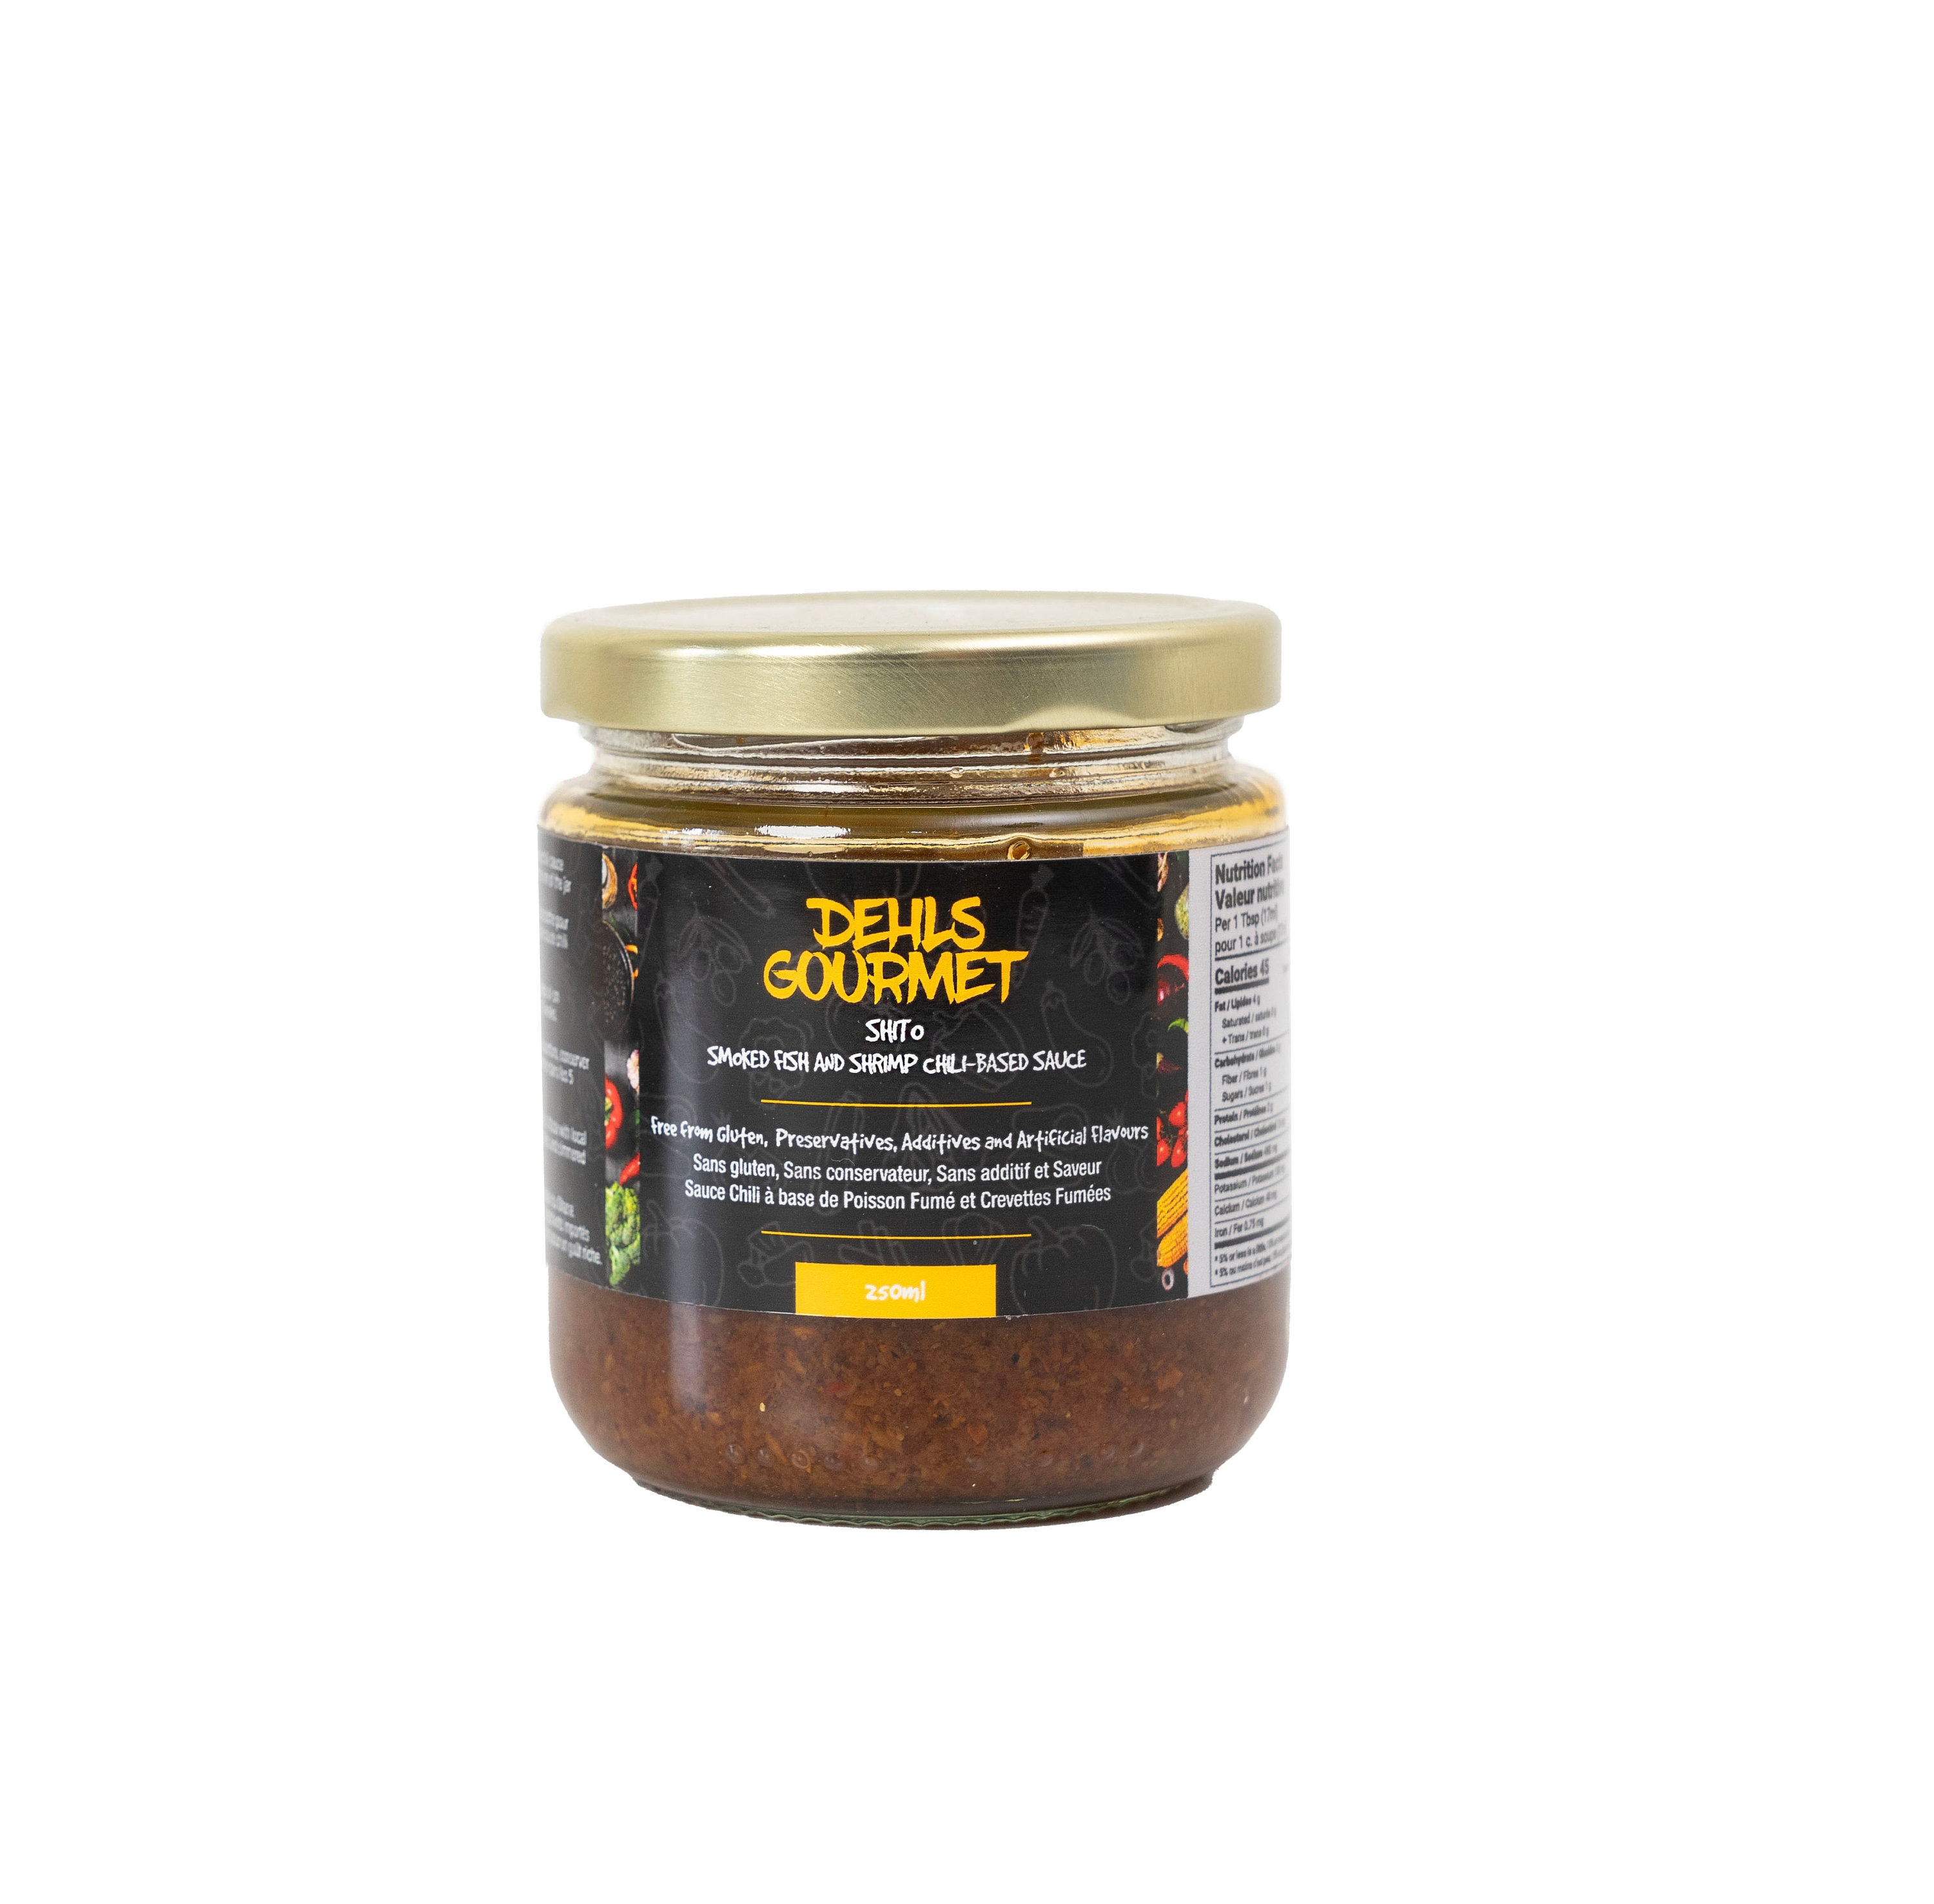 PepperRica, Gourmet African Hot Sauce | Shito - Authentic Recipe from Ghana  | with GHOST peppers, Crushed Dried Shrimp and Signature African Spices.